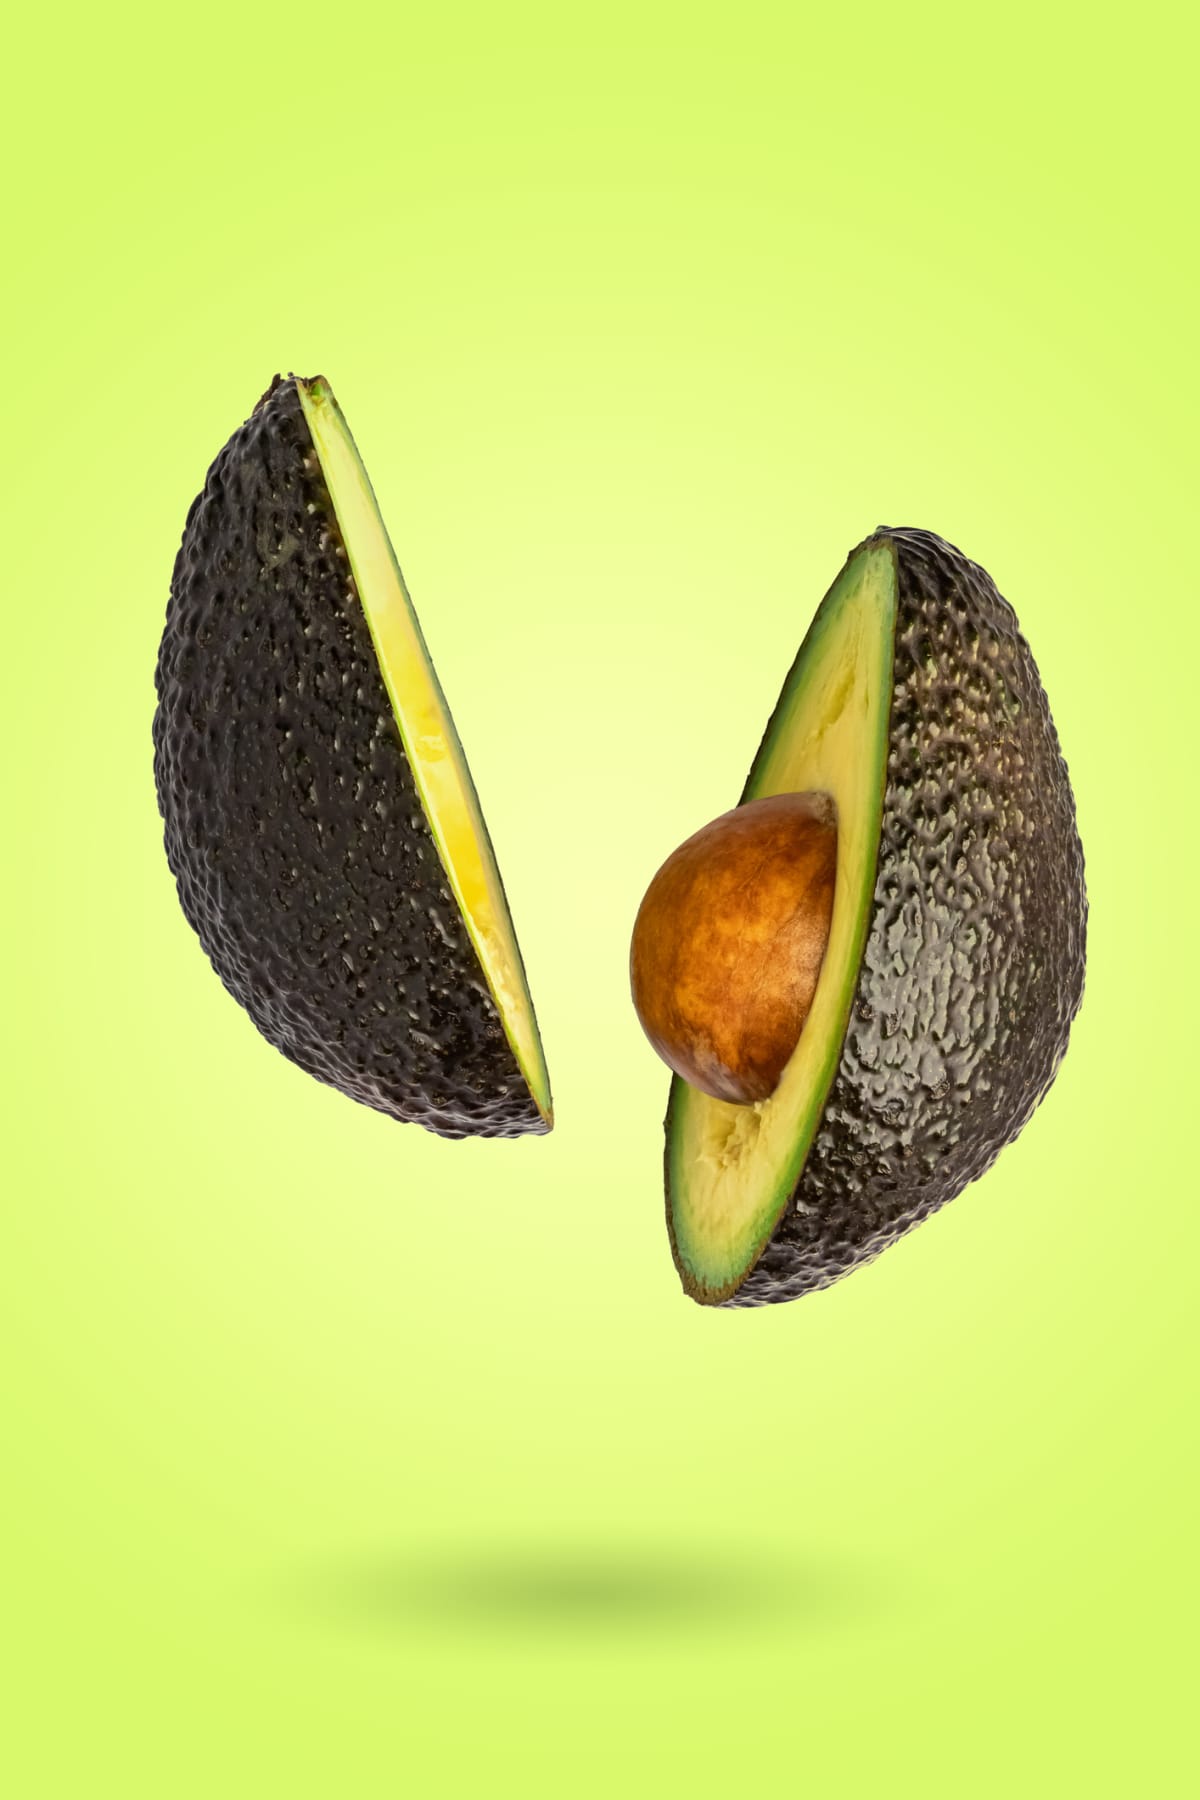 Keeping Avocados Fresh Is Easier Than You Think